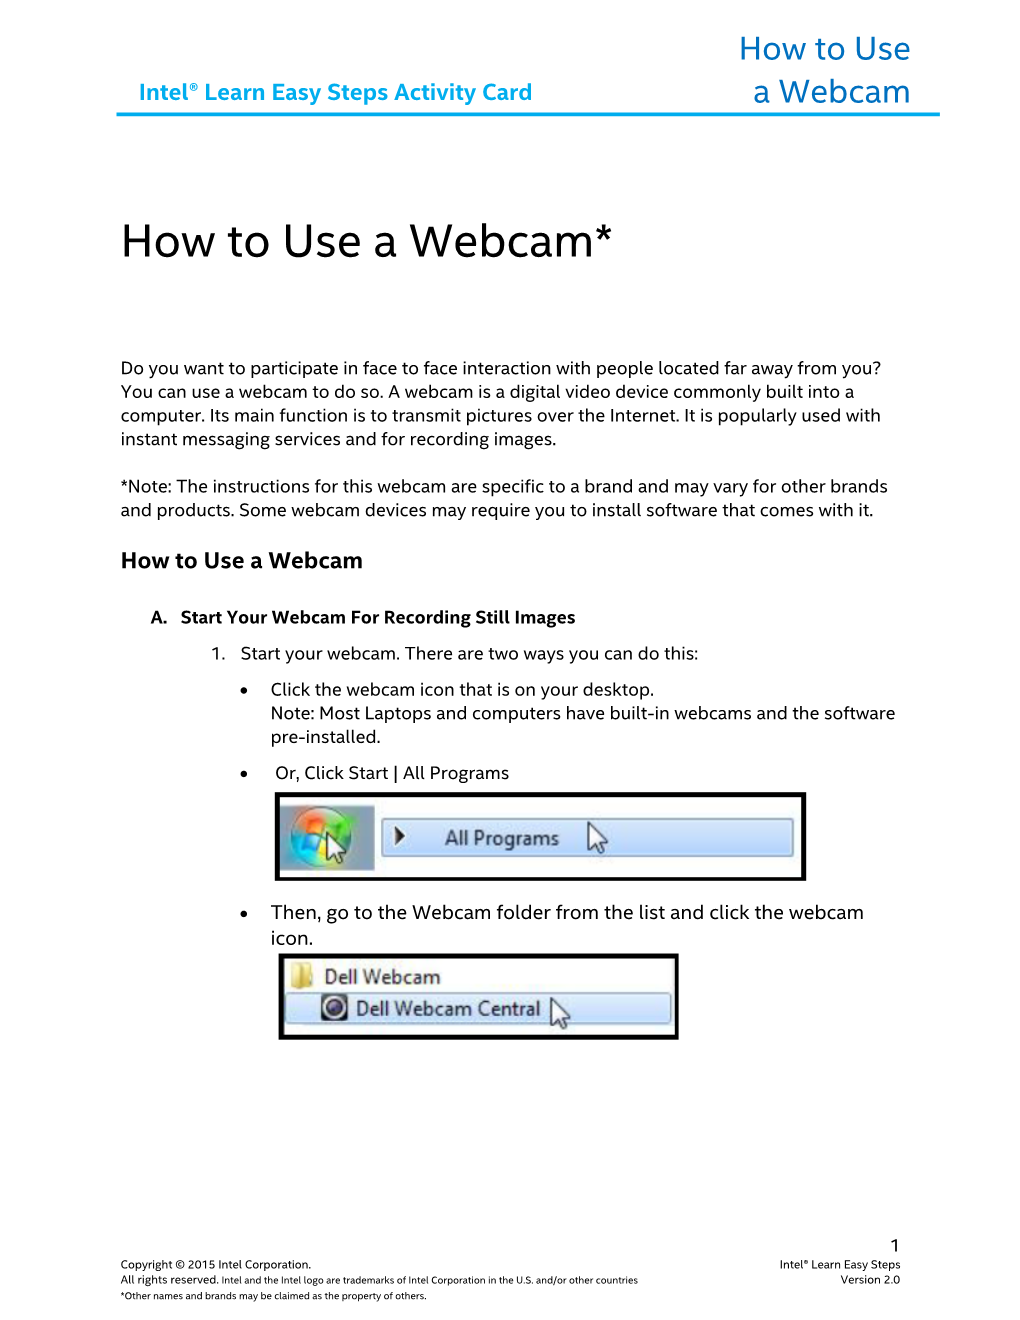 How to Use a Webcam*